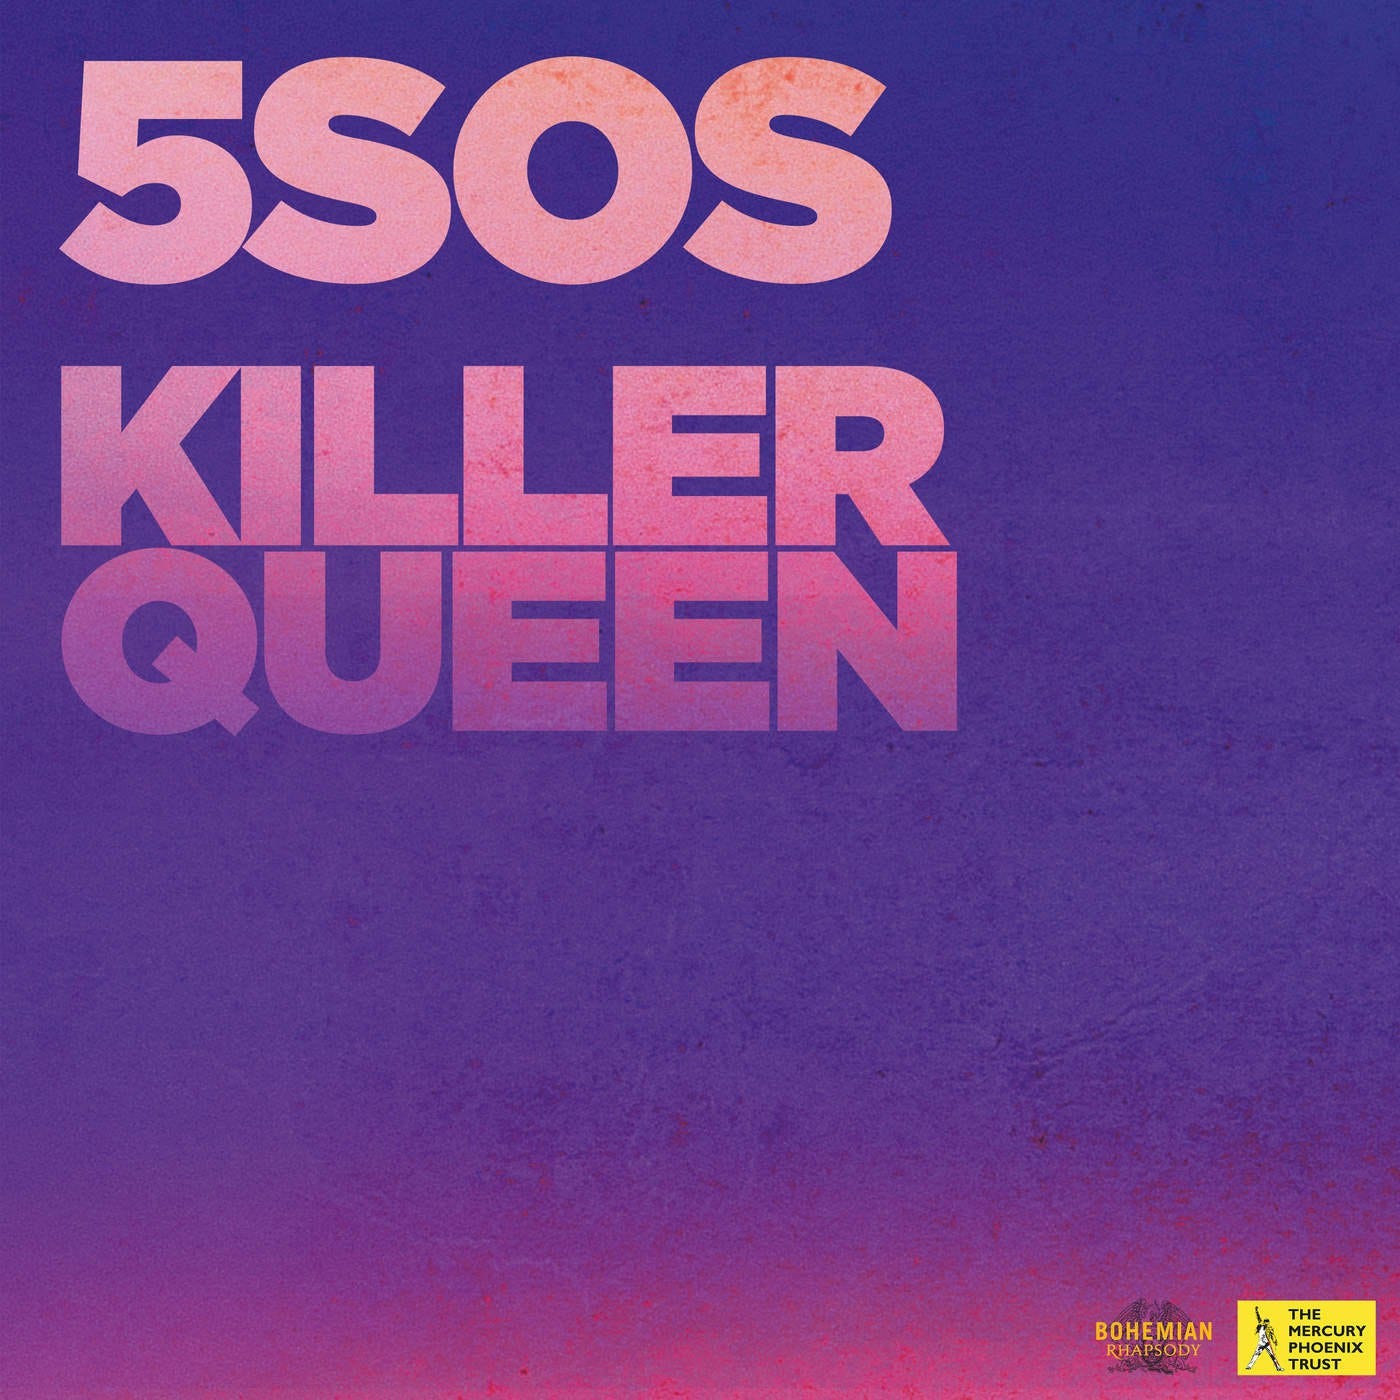 Download Mp3: 5 Seconds of Summer — Killer Queen | by charley boy | Medium